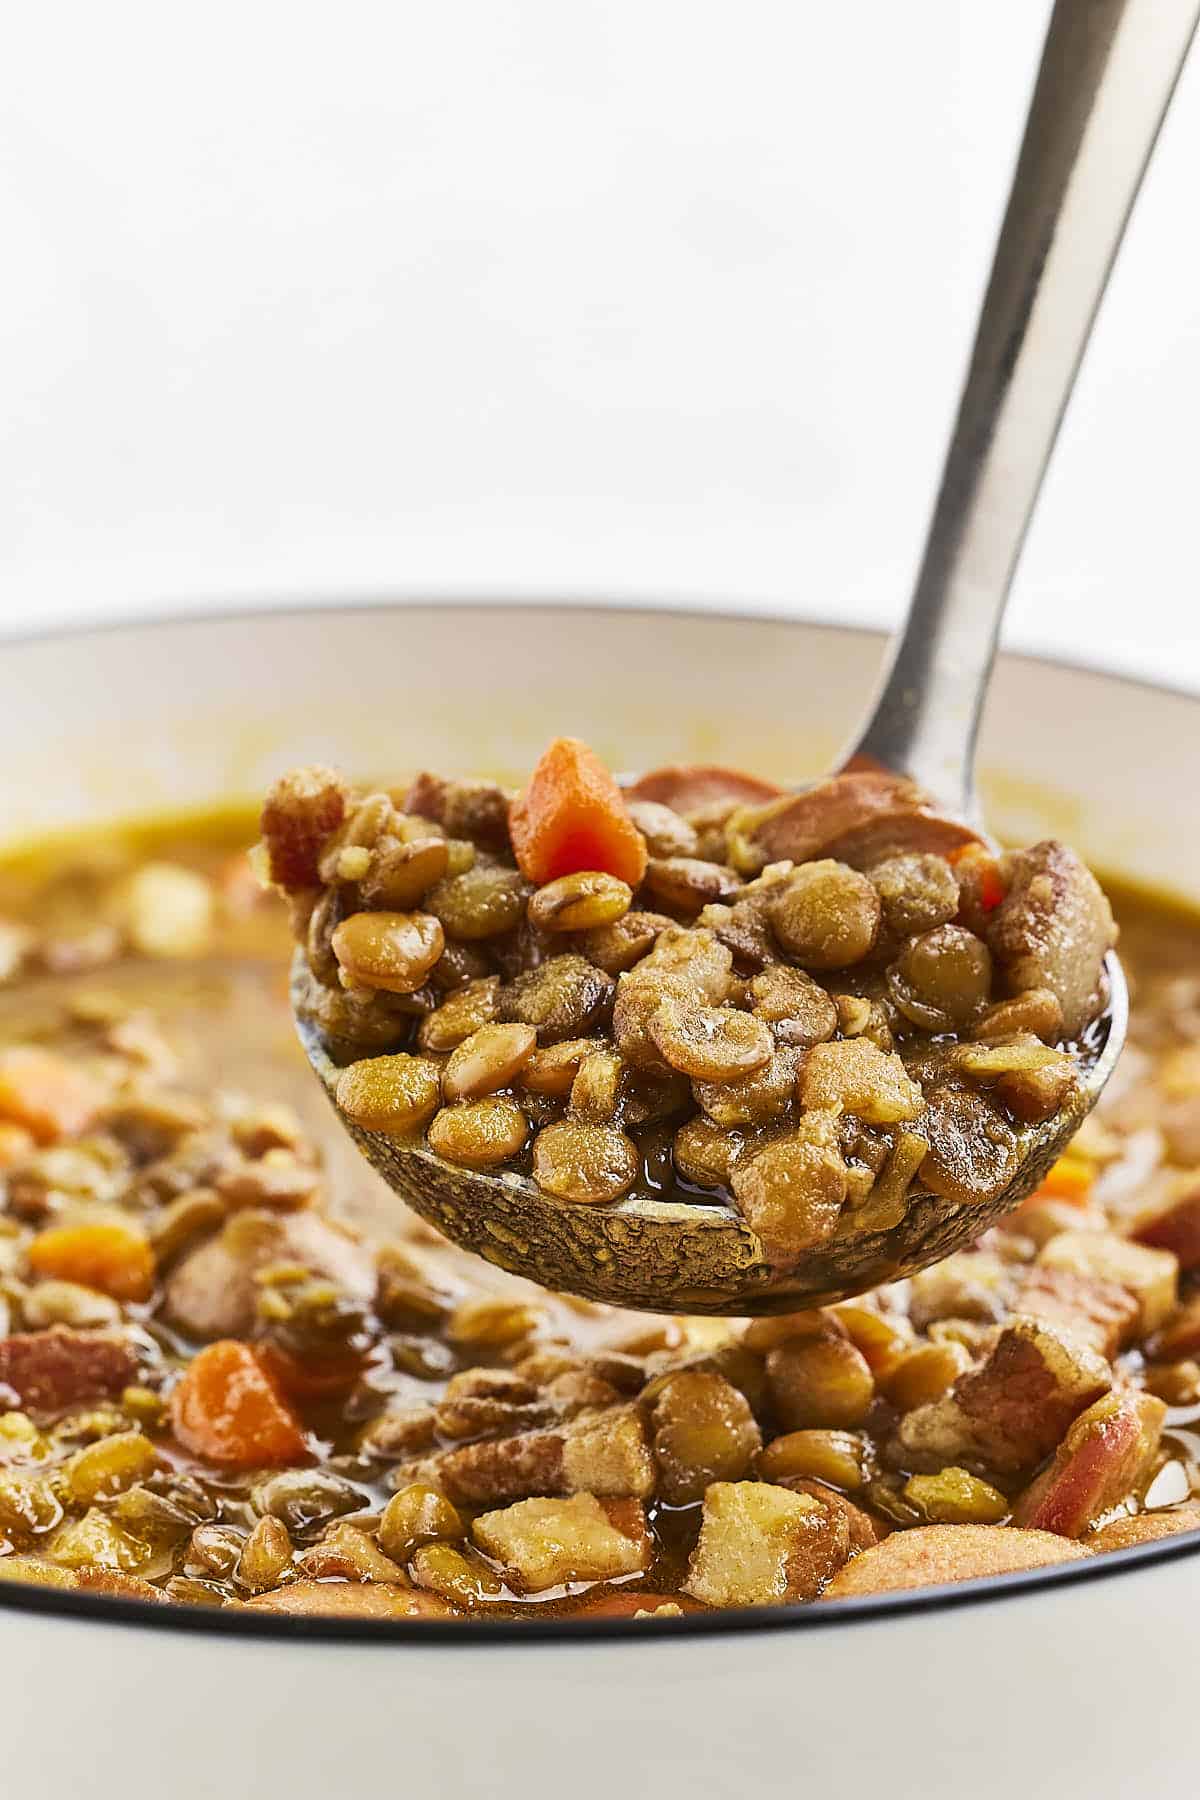 A ladle full of Lentil Soup with Sausage.